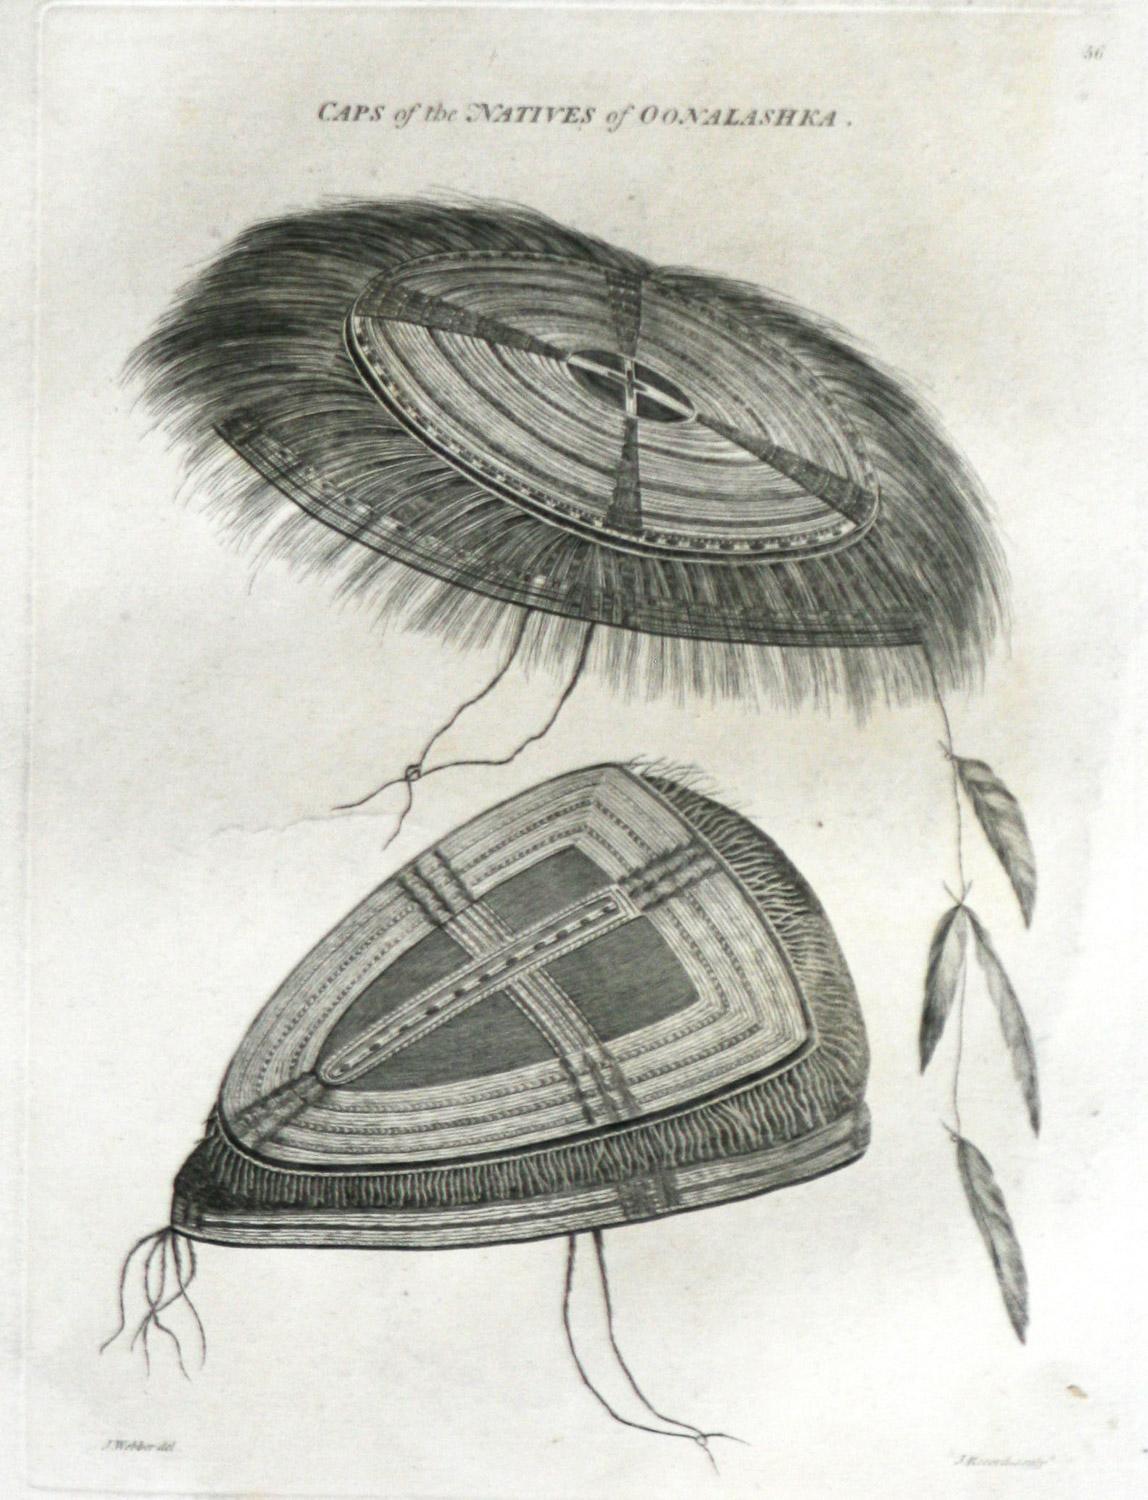 Caps of the Natives of Oonalashka (Alaska) is from the 1784 First Edition Atlas Accompanying Capt. James Cook and King; Third and Final Voyage of Captain James Cook. John Webber (1752-1793) was the official artist for the third voyage of Captain